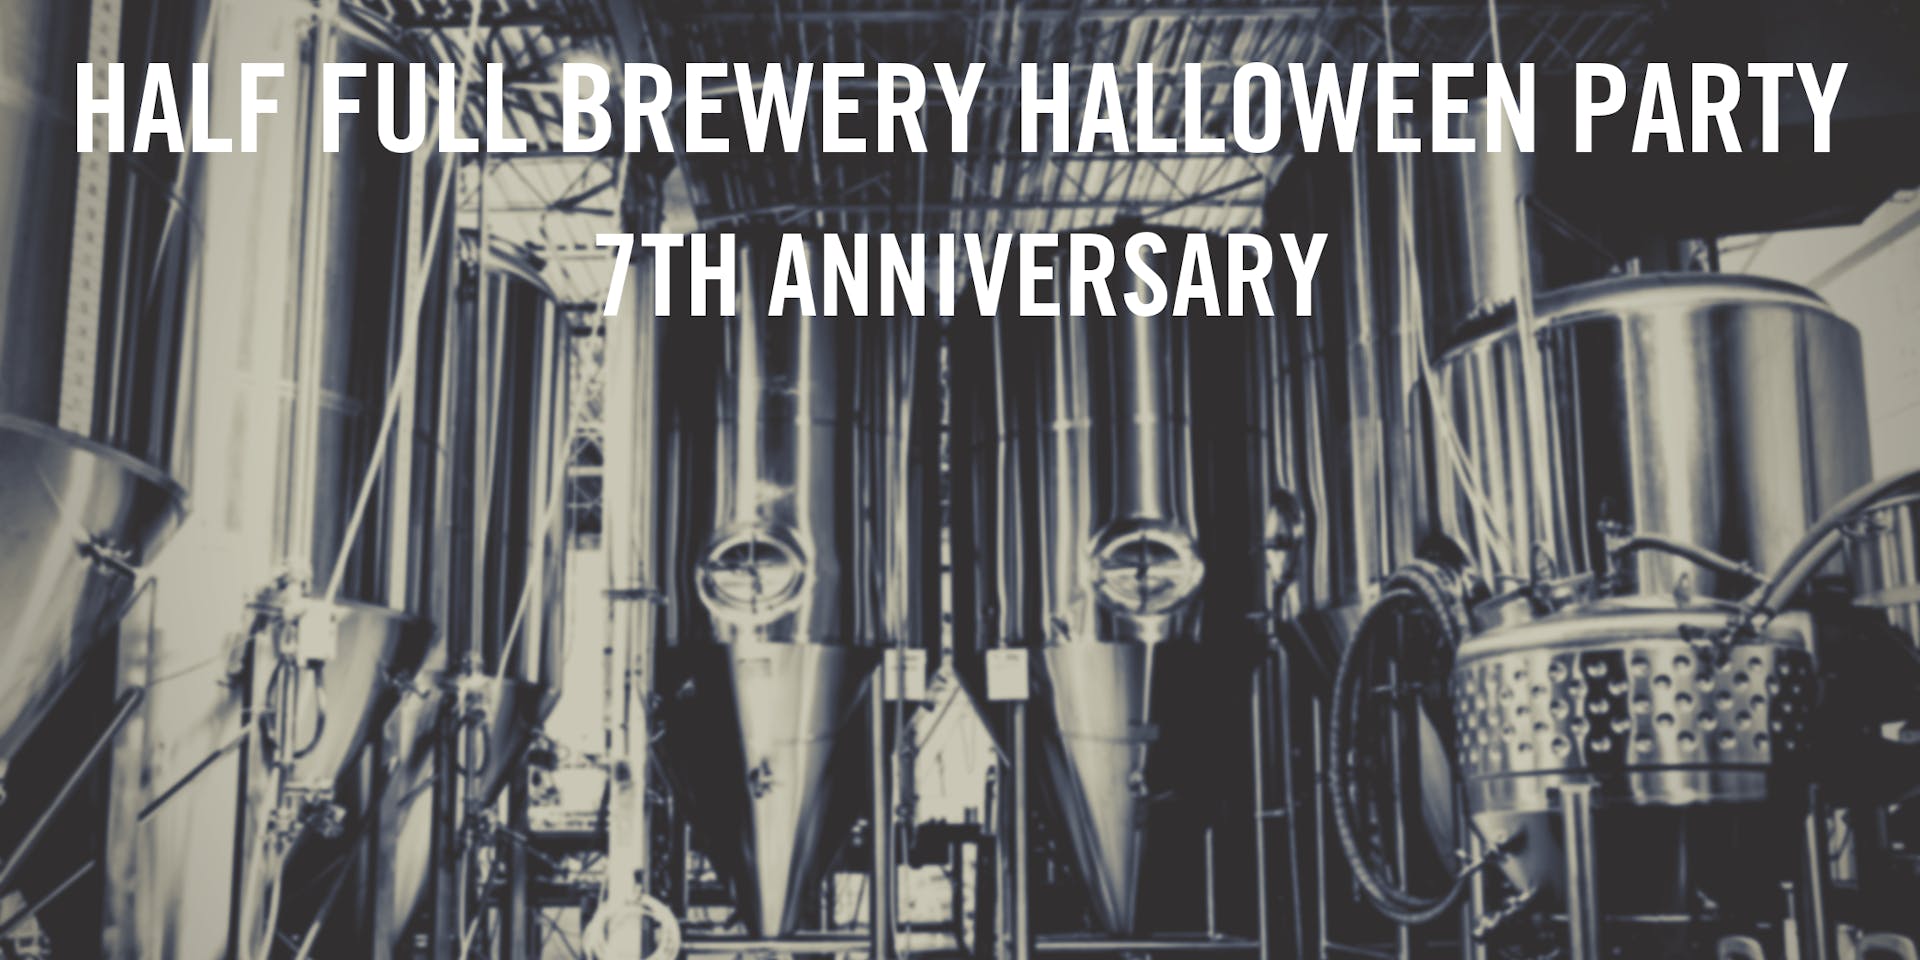 HALF FULL BREWERY HALLOWEEN PARTY 7TH ANNIVERSARY